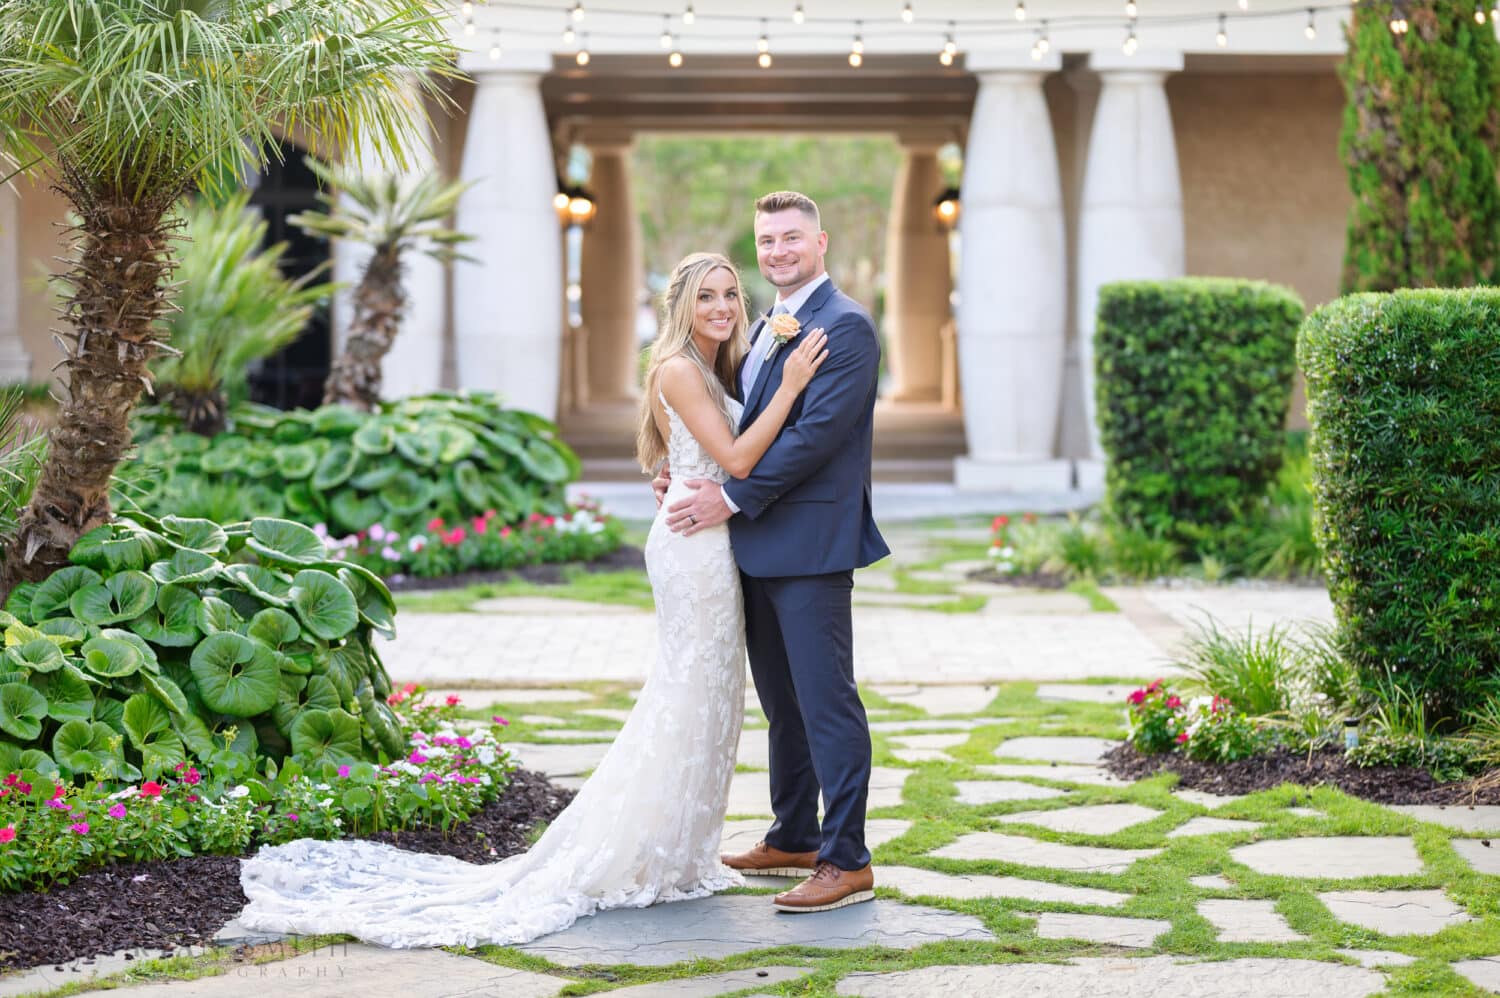 Romantic portraits in the beautiful courtyard foliage of the bride and groom - 21 Main Events